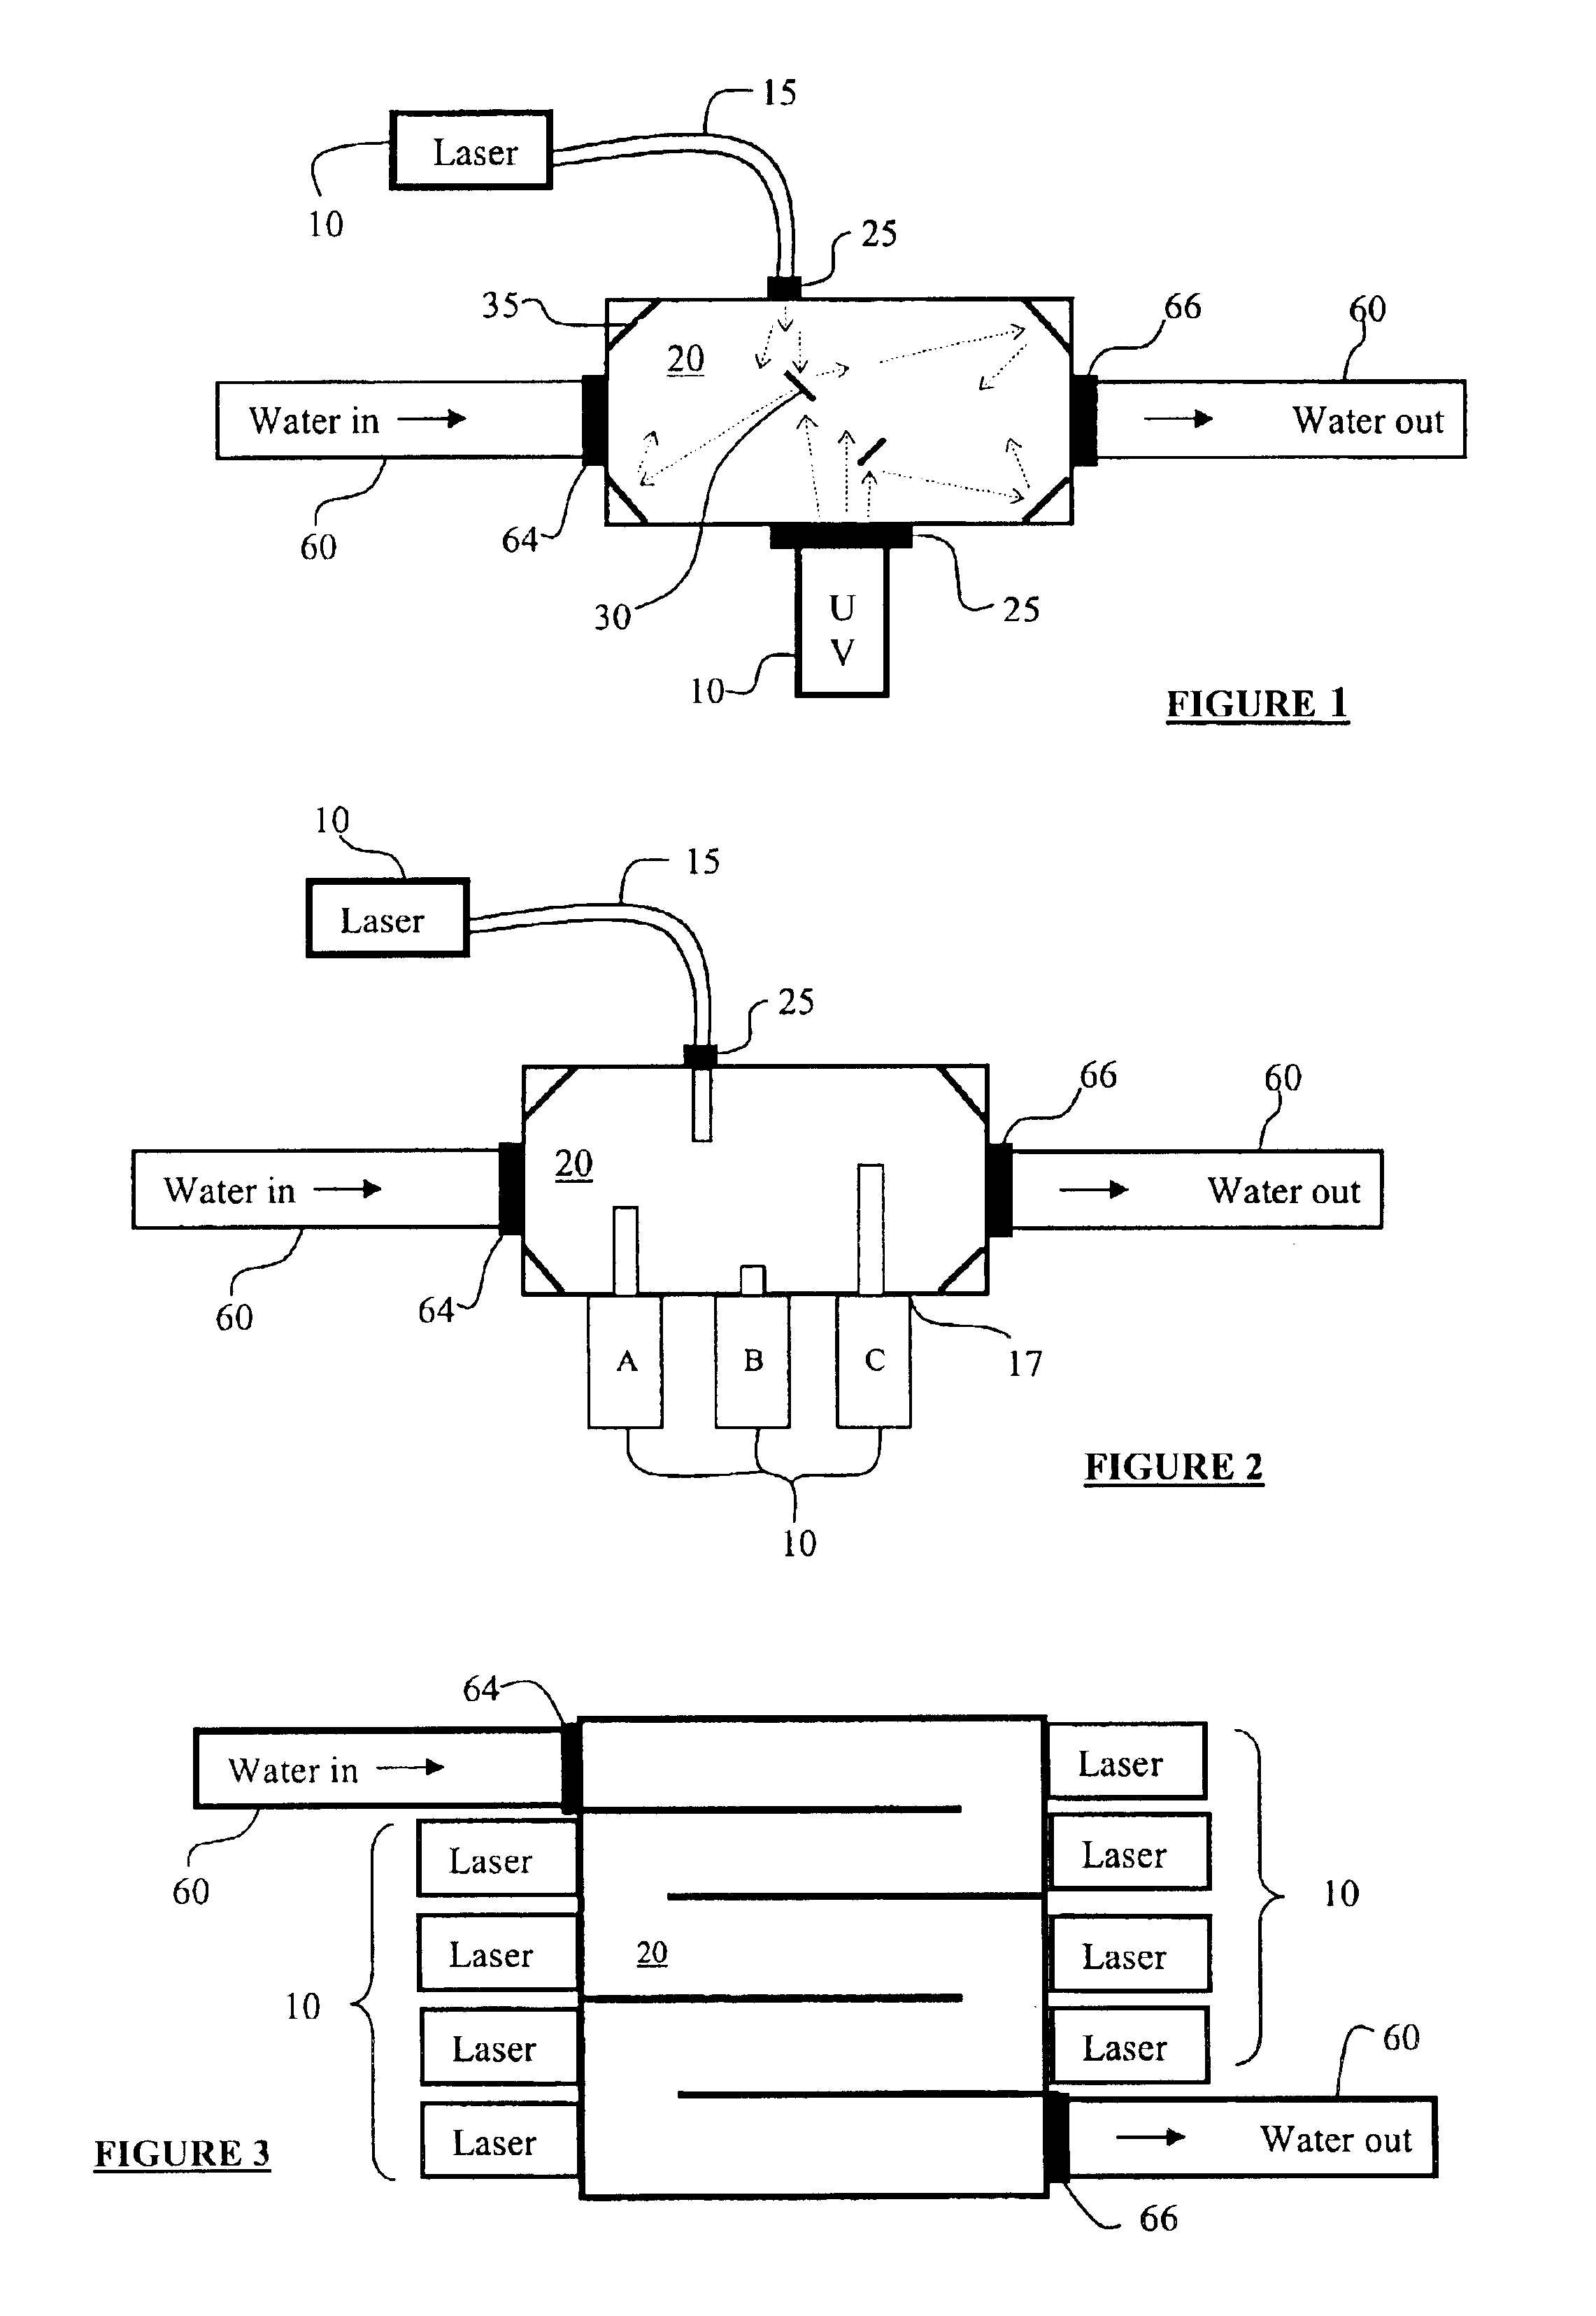 Laser water detection, treatment and notification systems and methods